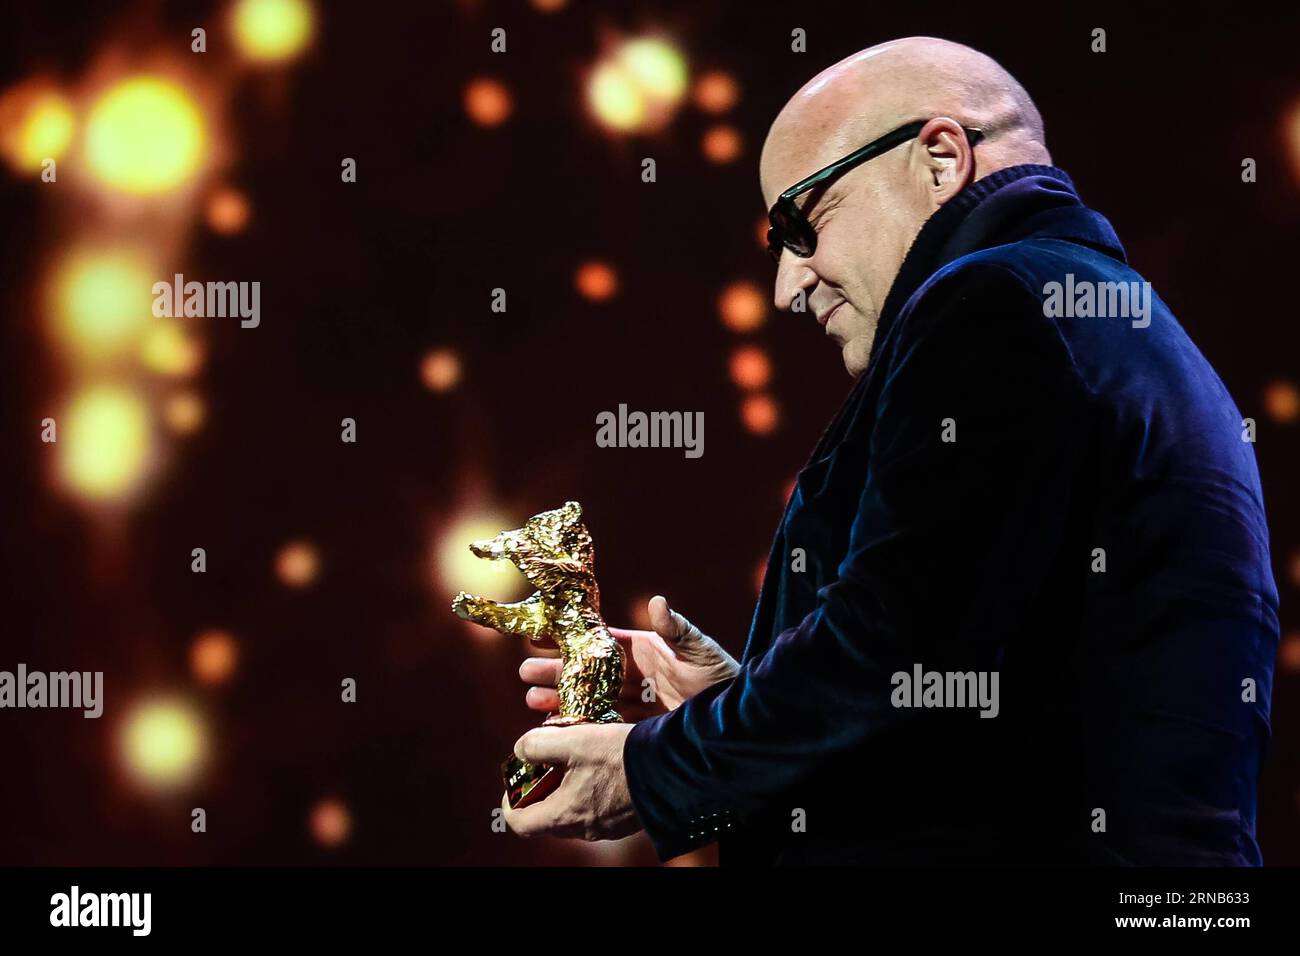 Italian director Gianfranco Rosi holds the trophy of Golden Bear for Best Film for the film Fire at Sea during the awards ceremony of the 66th Berlinale International Film Festival in Berlin, Germany, Feb. 20, 2016. The Italian documentary film Fire at Sea won the Golden Bear, the top jury prize awarded to the best film, in the 66th Berlin International Film Festival on Saturday. ) GERMANY-BERLIN-BERLINALE INTERNATIONAL FILM FESTIVAL-AWARDS CEREMONY-GOLD BEAR-GIANFRANCO ROSI ZhangxFan PUBLICATIONxNOTxINxCHN   Italian Director Gian Franco Rosi holds The Trophy of Golden Bear for Best Film for T Stock Photo